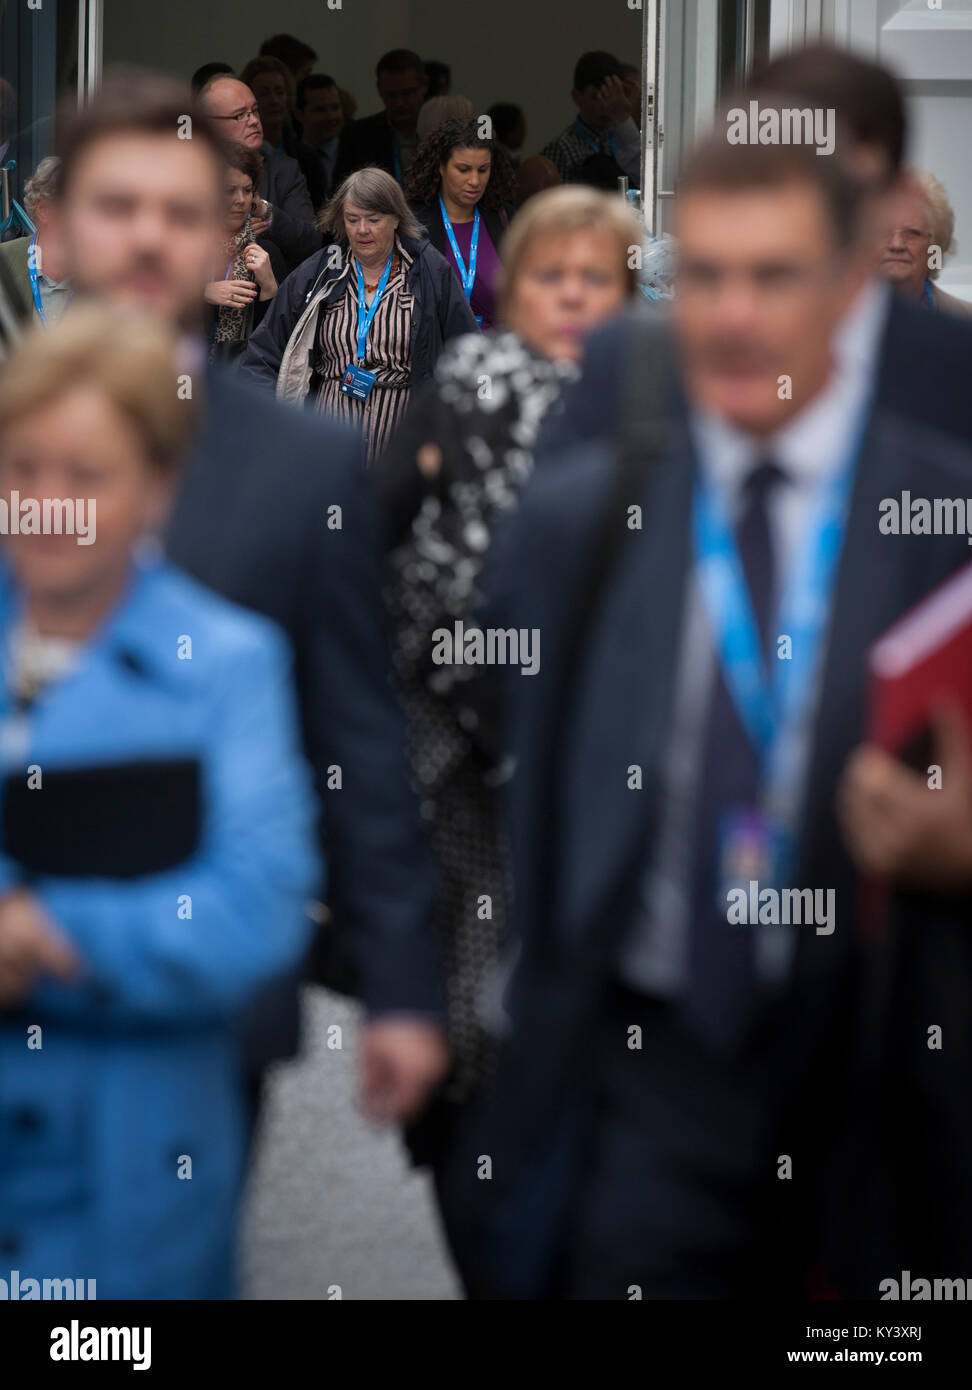 The 2015 Conservative Party annual conference in Manchester, England. Stock Photo